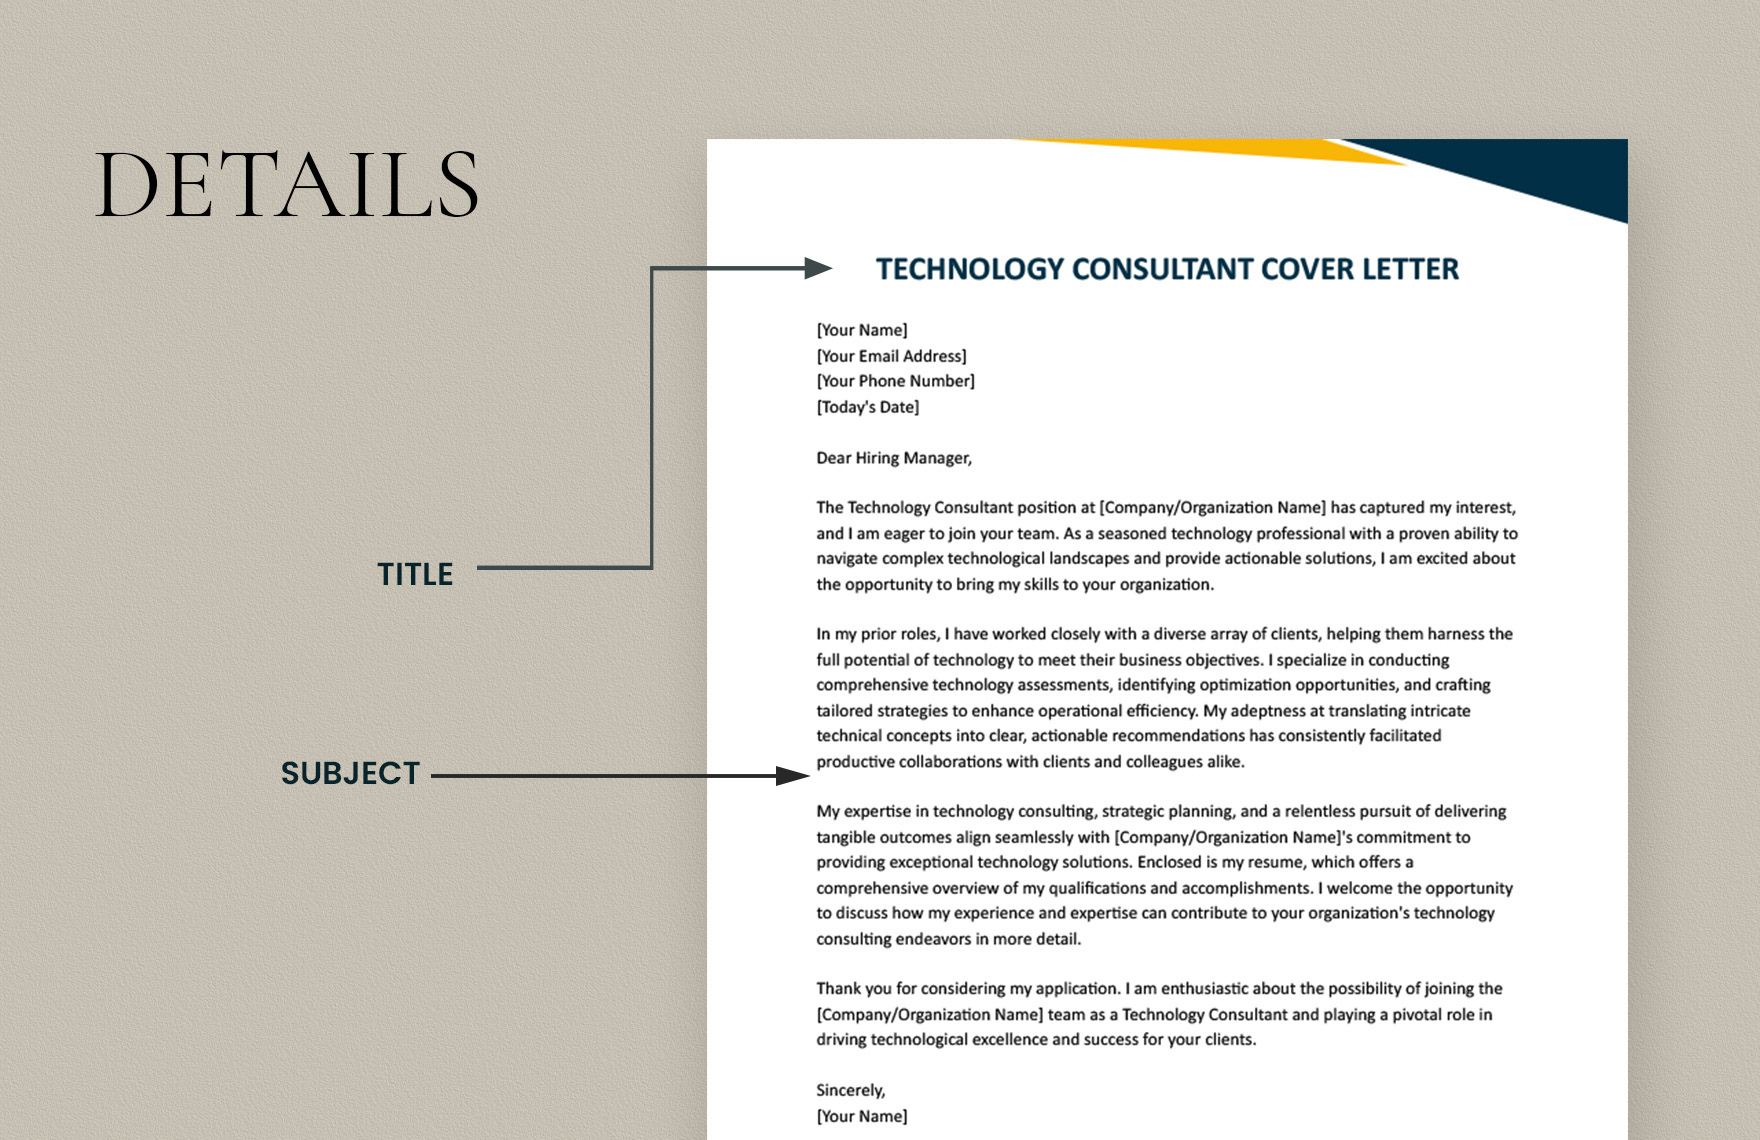 Technology Consultant Cover Letter